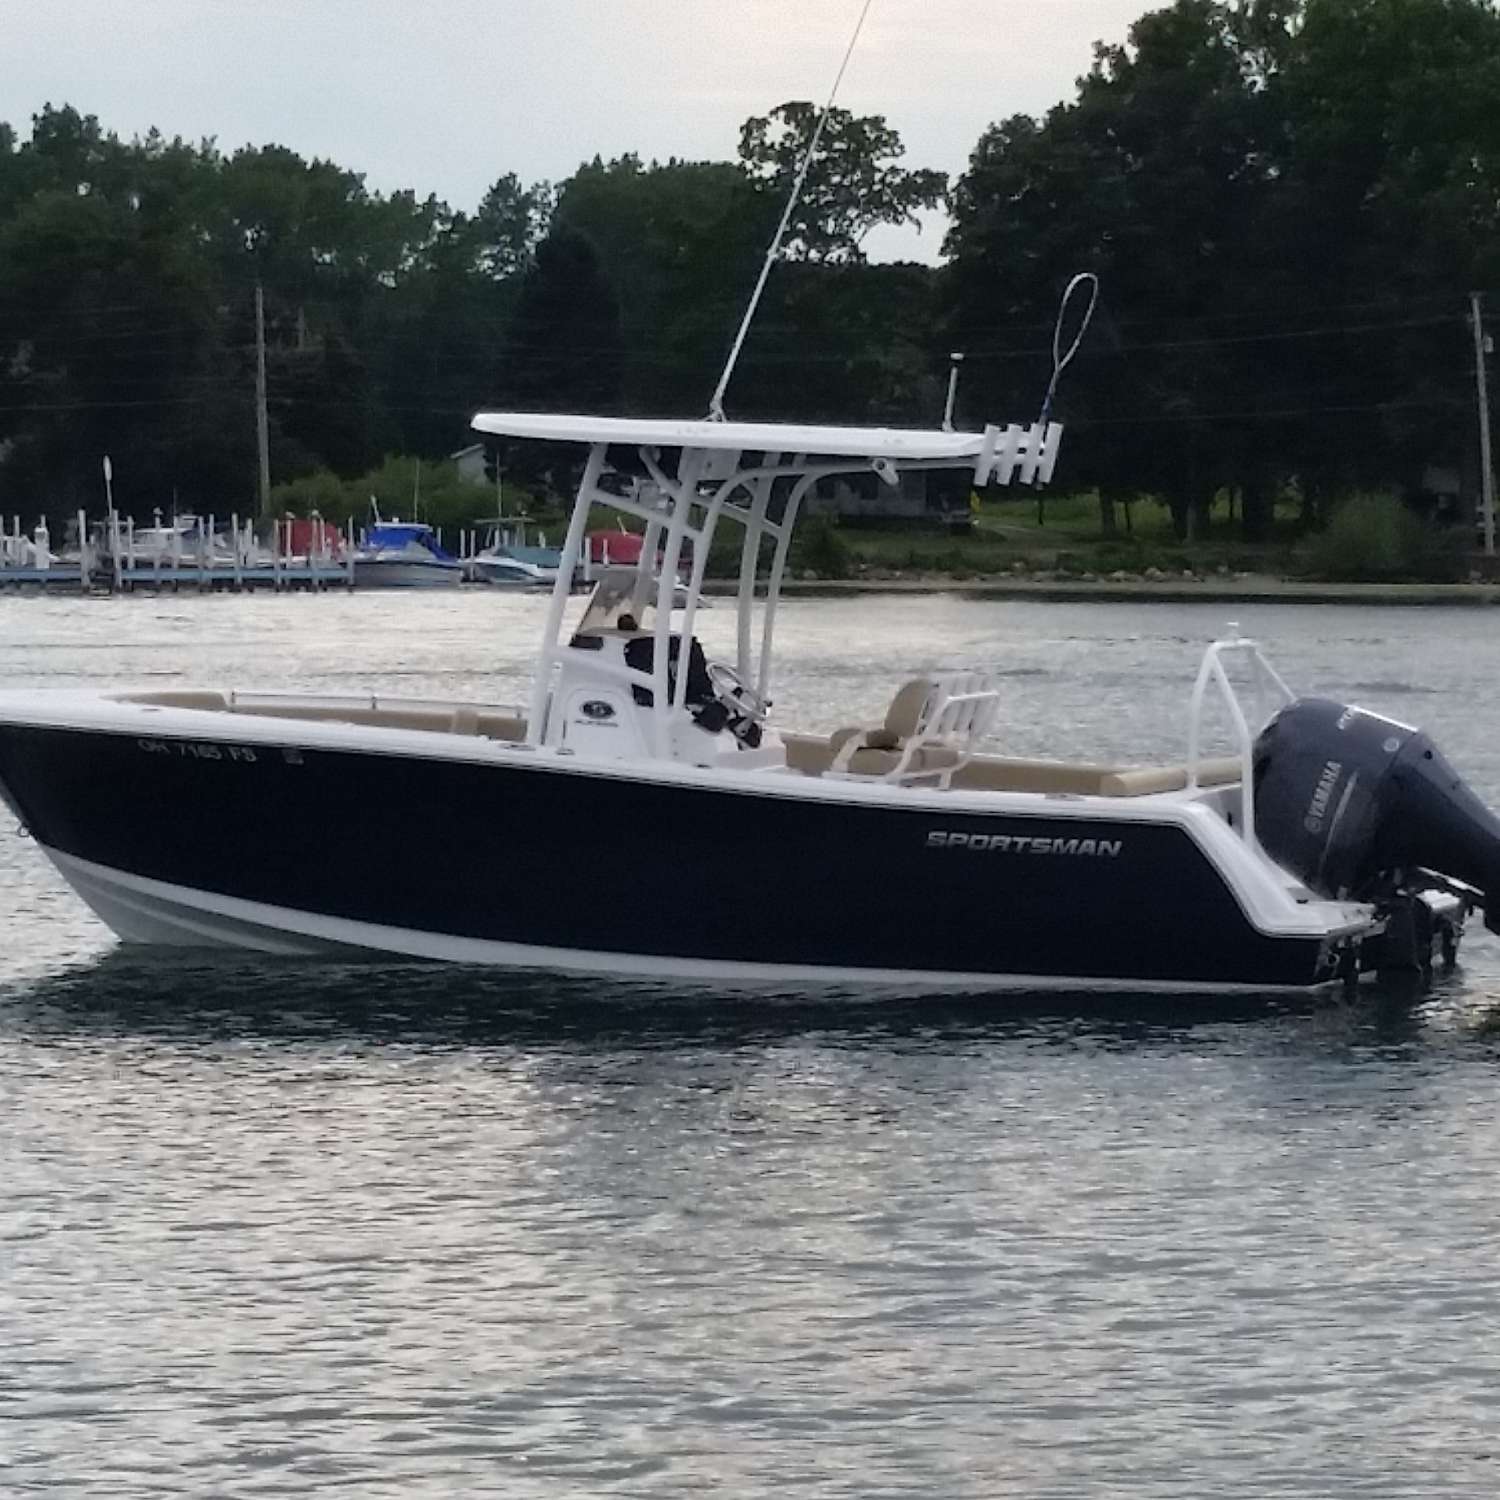 This is a beautiful 2017 231 Heritage  platinum at Put in bay ohio on lake Erie.